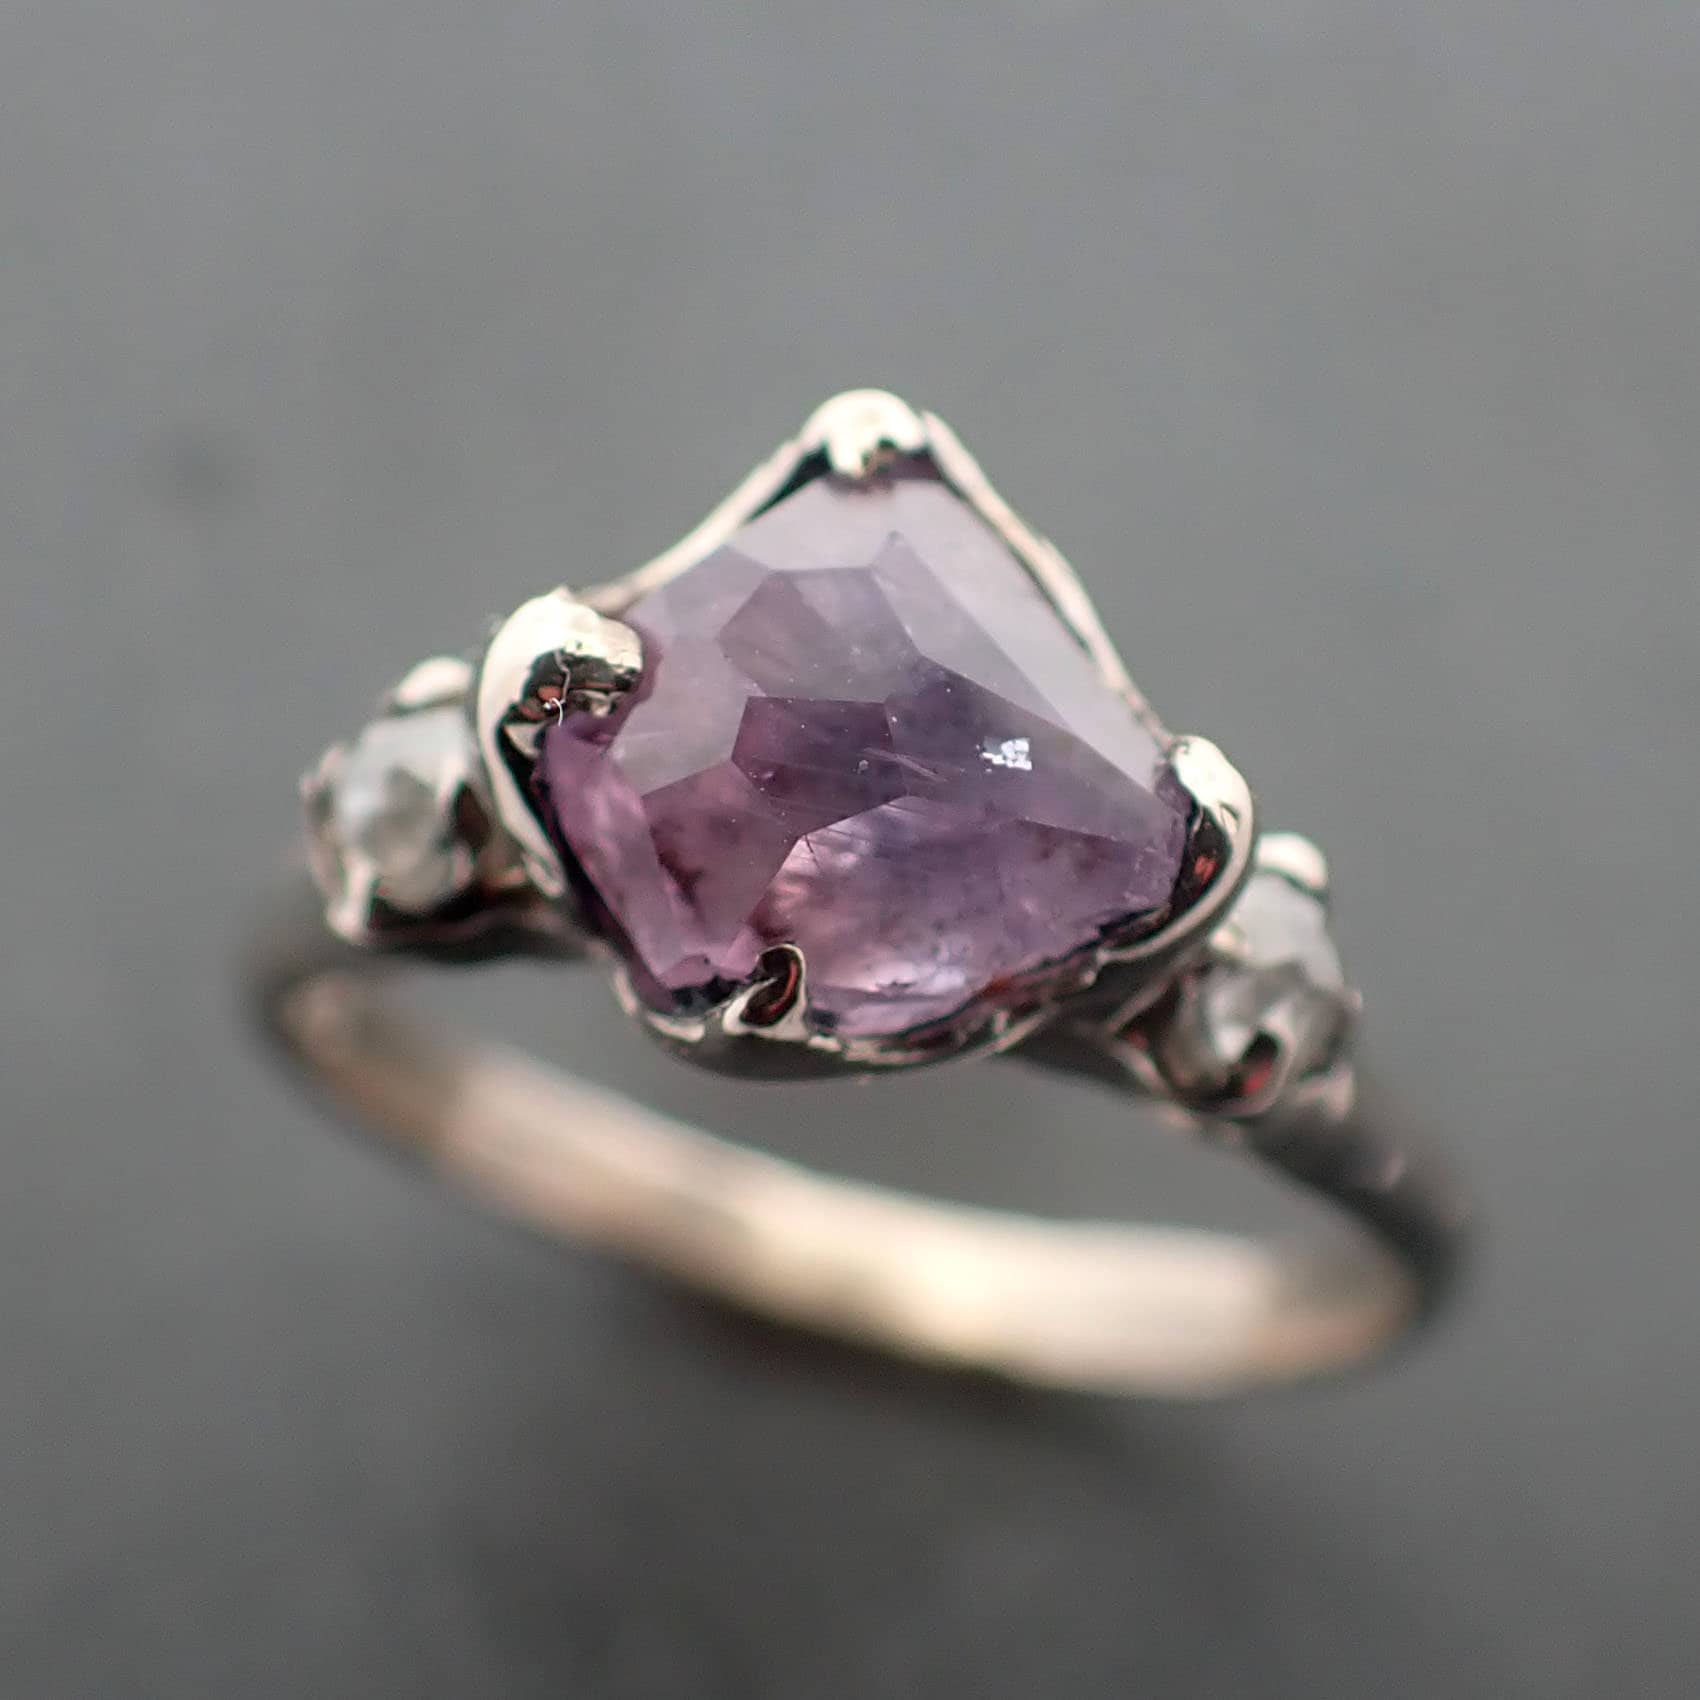 Partially Faceted Purple Sapphire with side diamonds Multi stone 14k White Gold Engagement Ring Wedding Ring Custom Gemstone Ring 3430